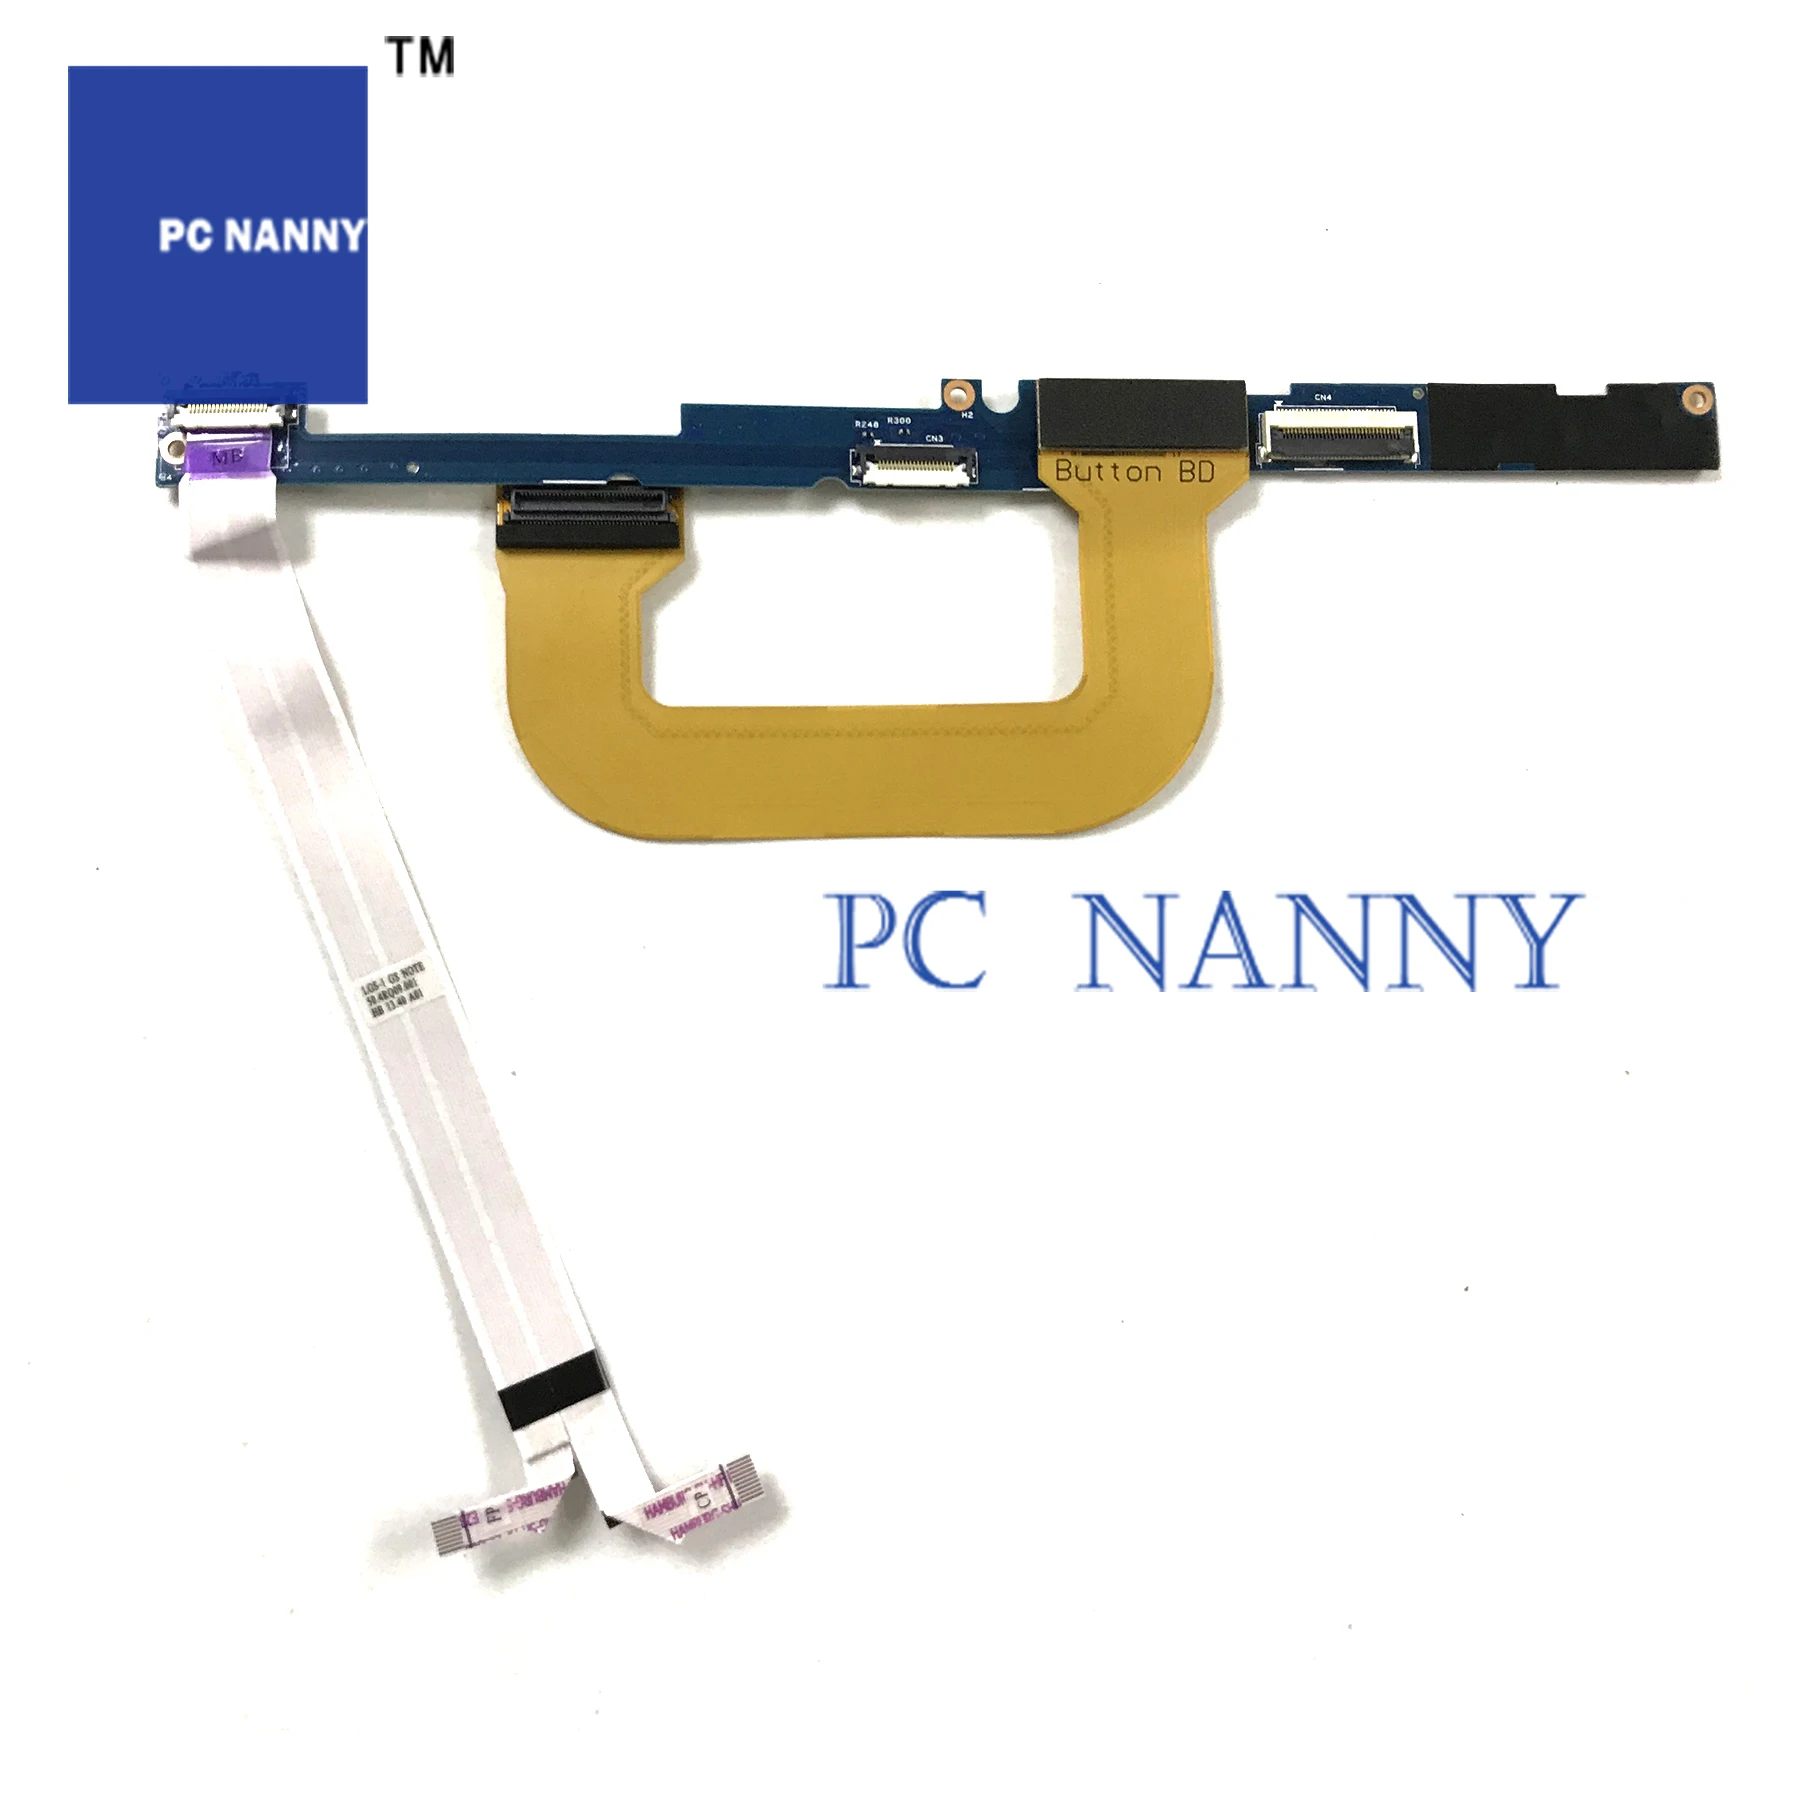 PC NANNY FOR X1 LAPTOP POWER BUTTON BOARD WITH CABLE 04W3909 55.4RQ04.021G WORKS |